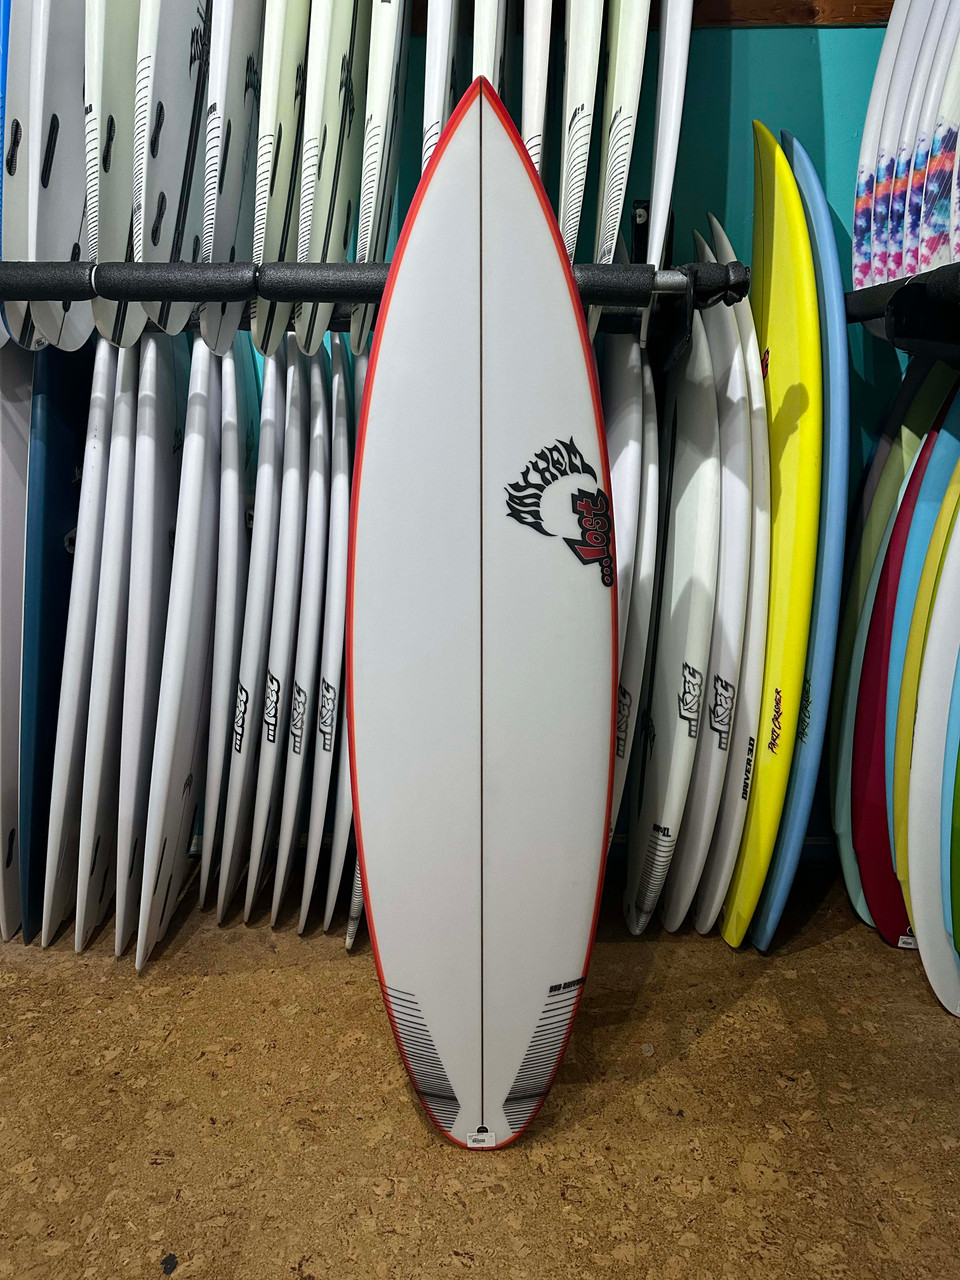 6'5 LOST SUB DRIVER 2.0 SURFBOARD- Catalyst